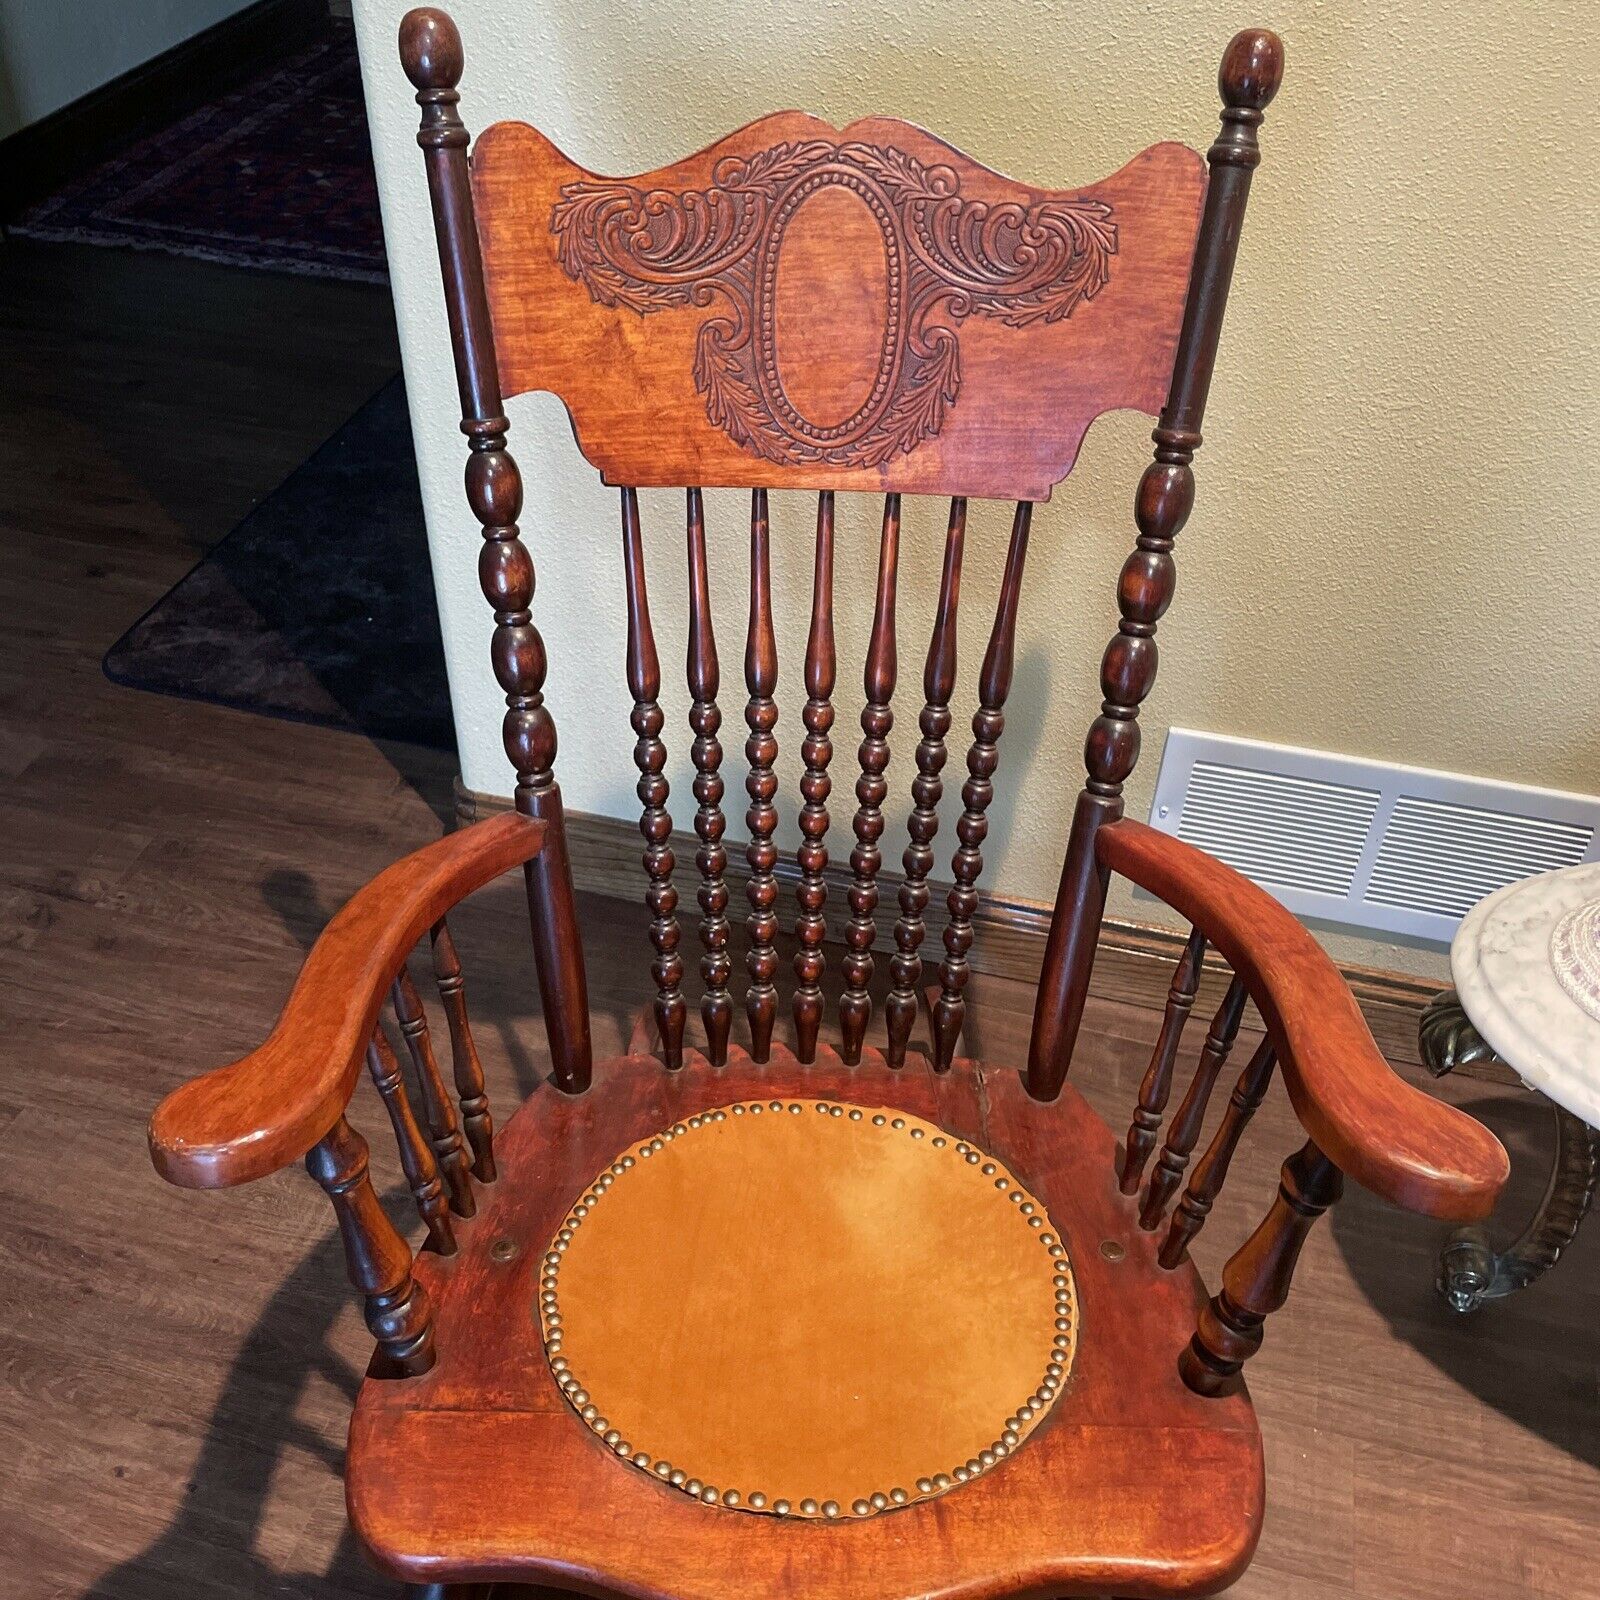 Antique Rocking Chair 1890’s, Cherrywood or Mahogany with Leather Seat